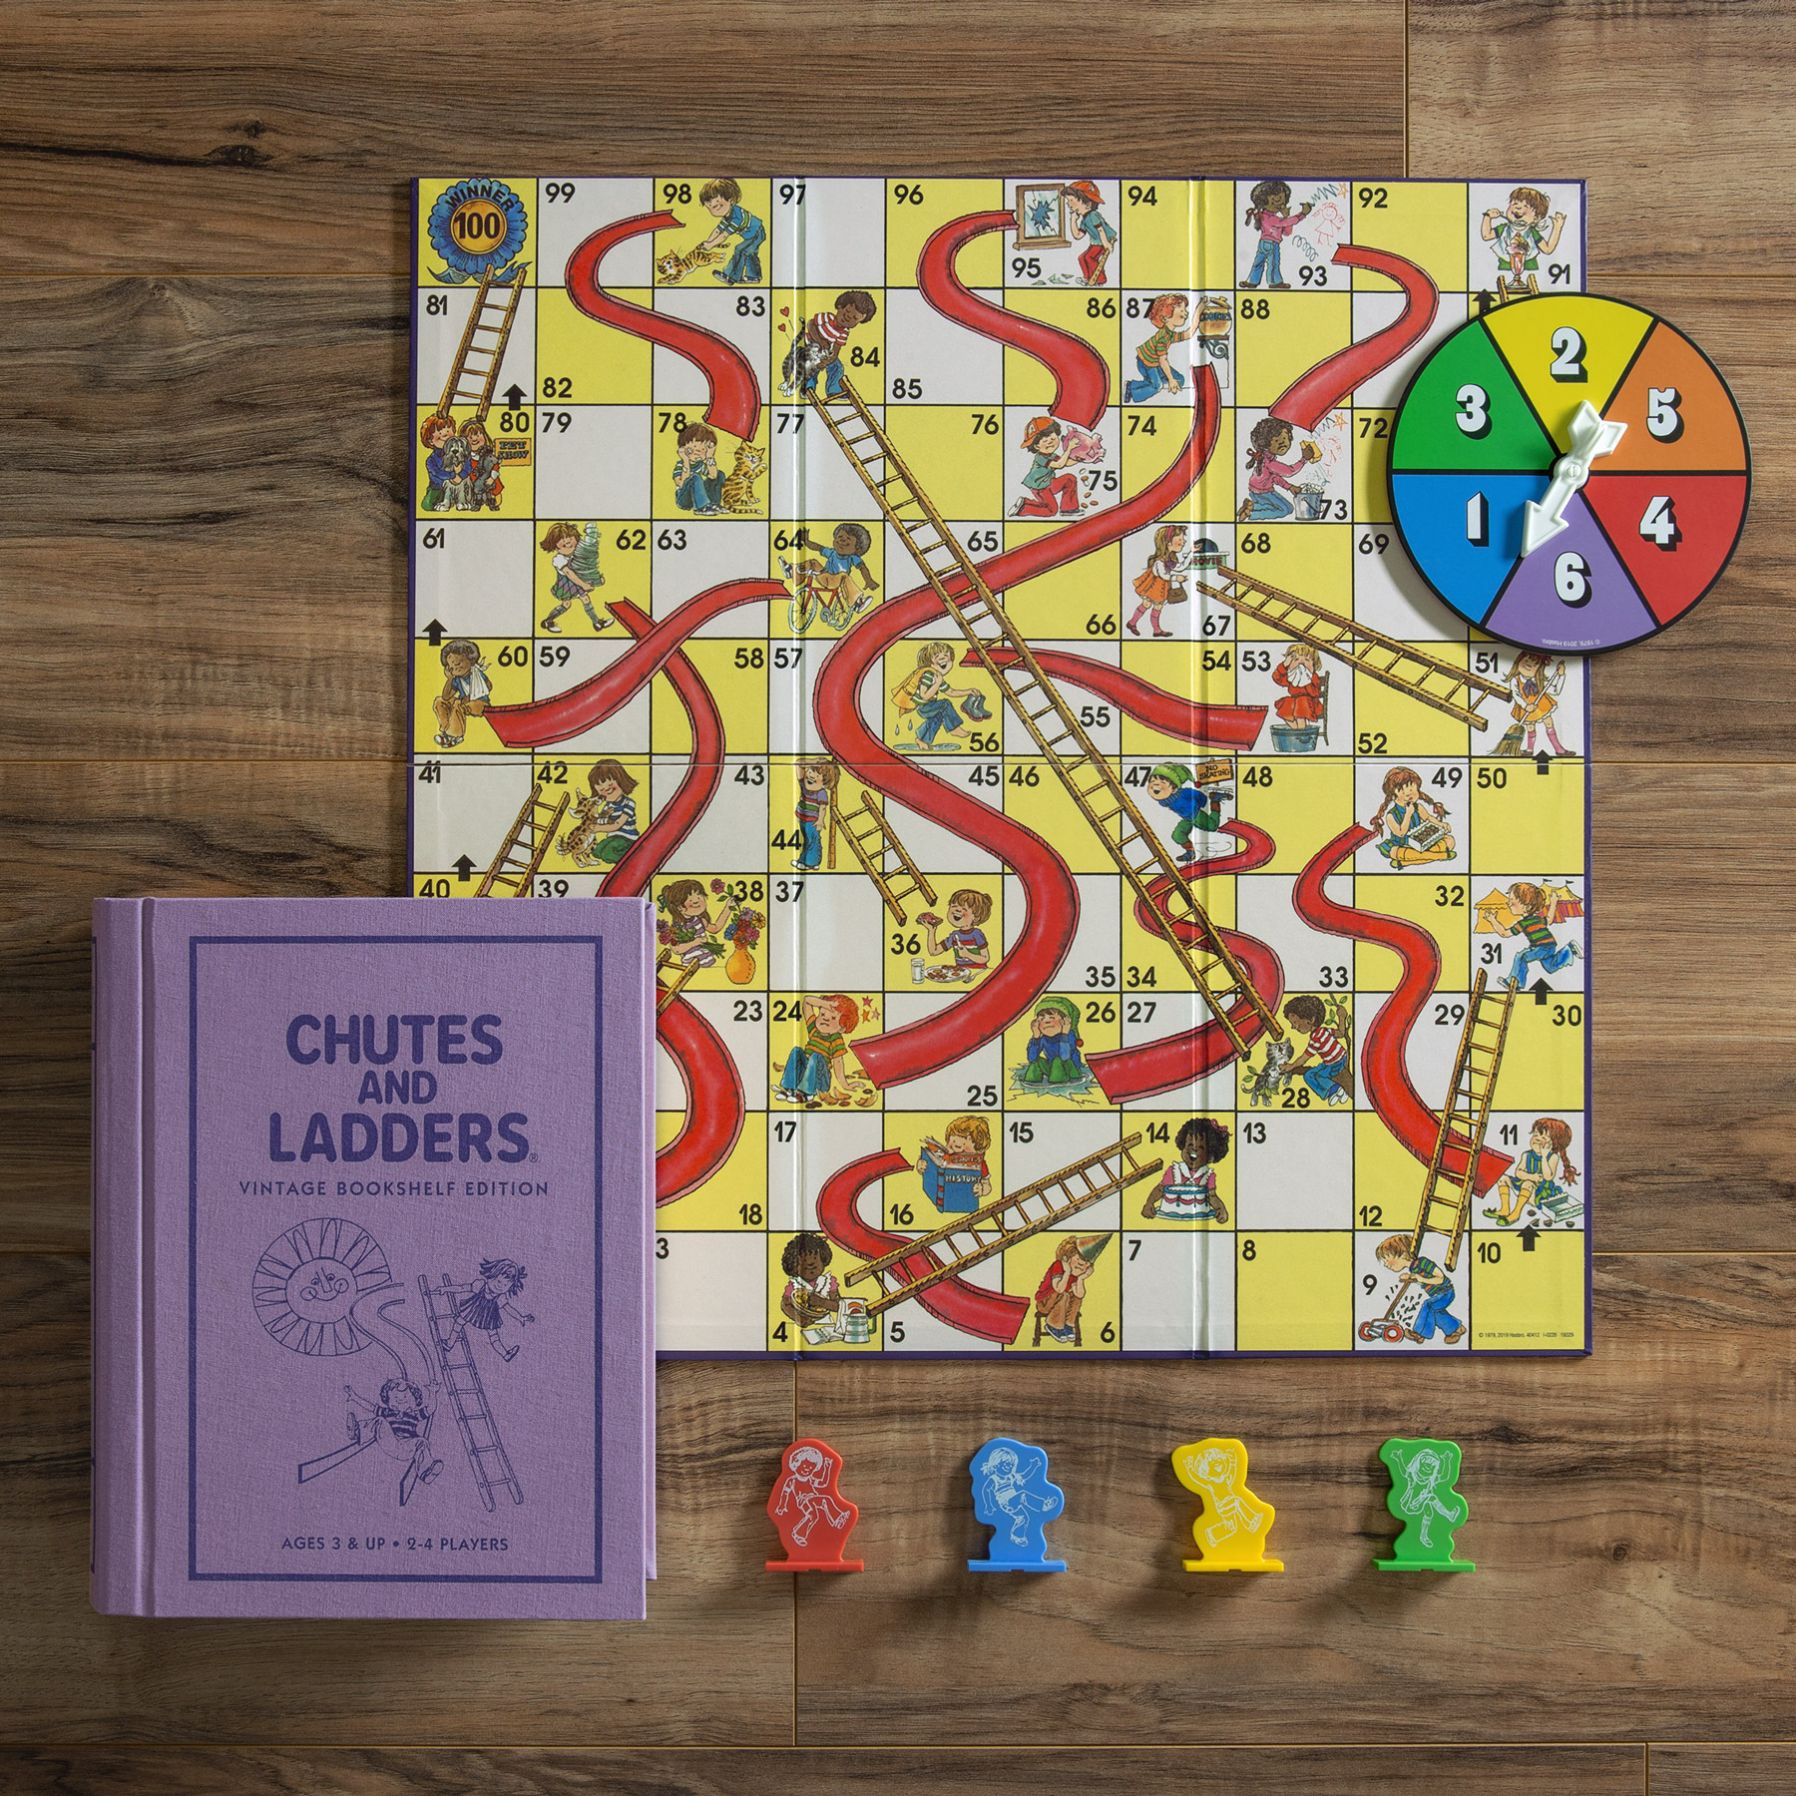 Books and Ladders Classic Board Game [Book]